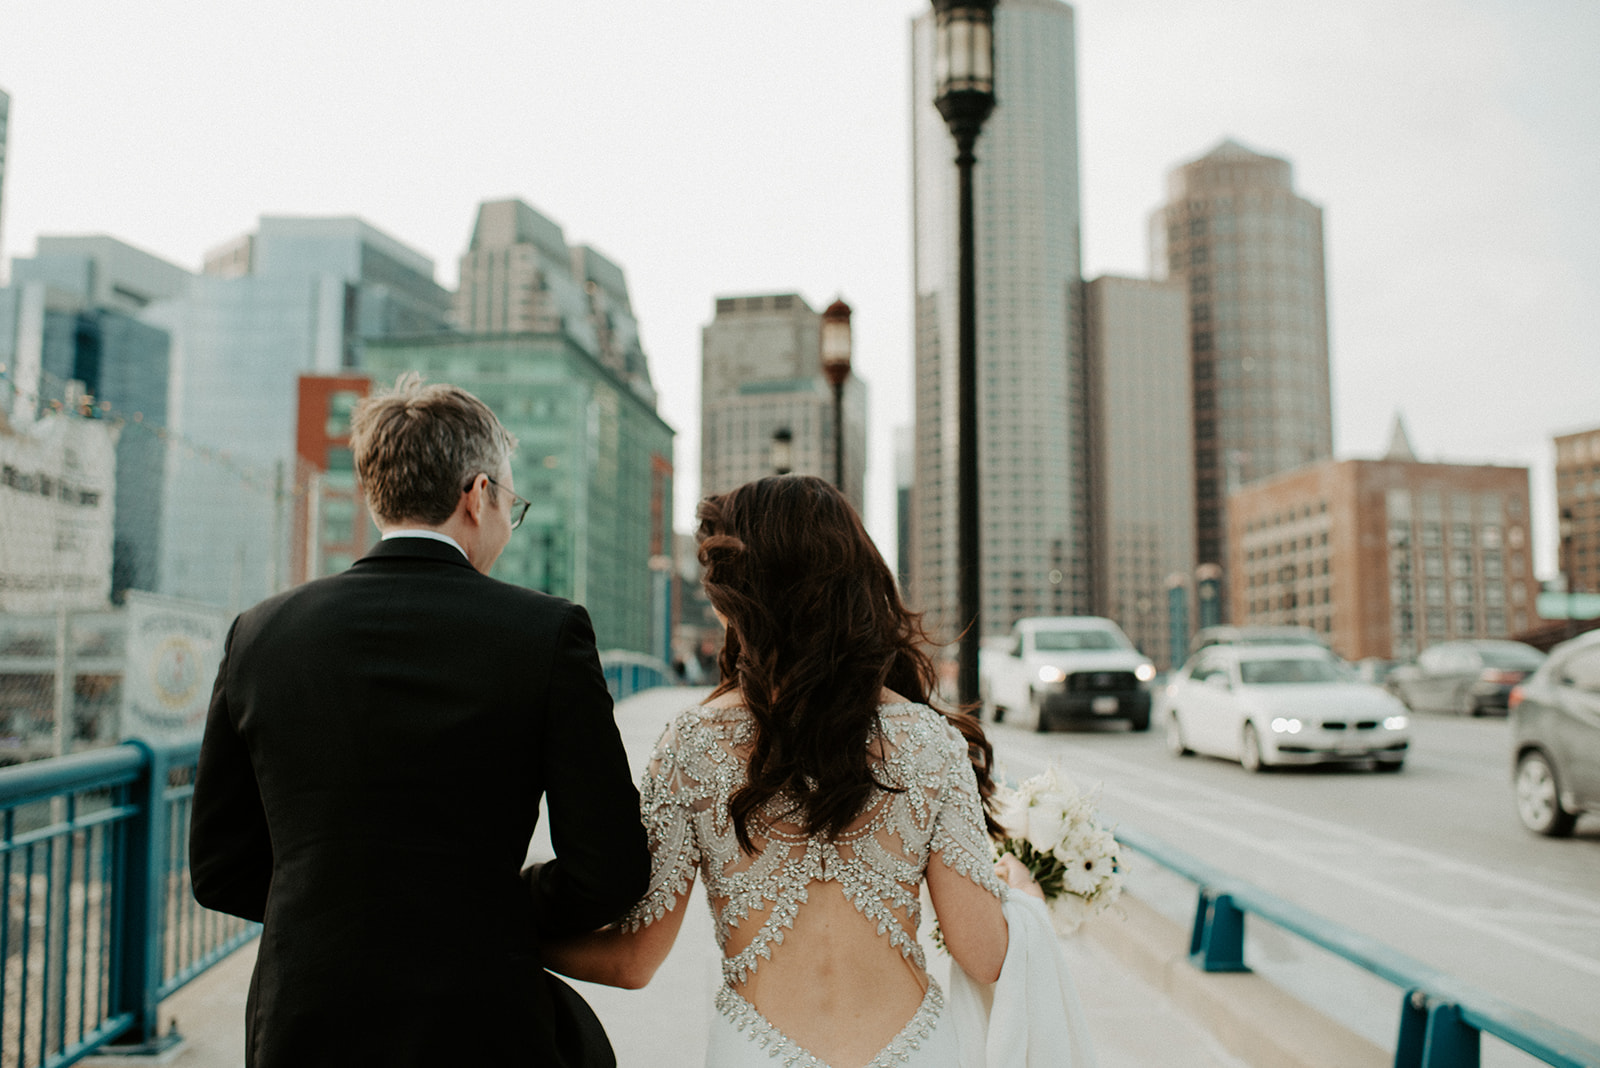 1920's Great Gatsby Inspired Wedding | Downtown Boston Wedding | Boston Wedding Photographer